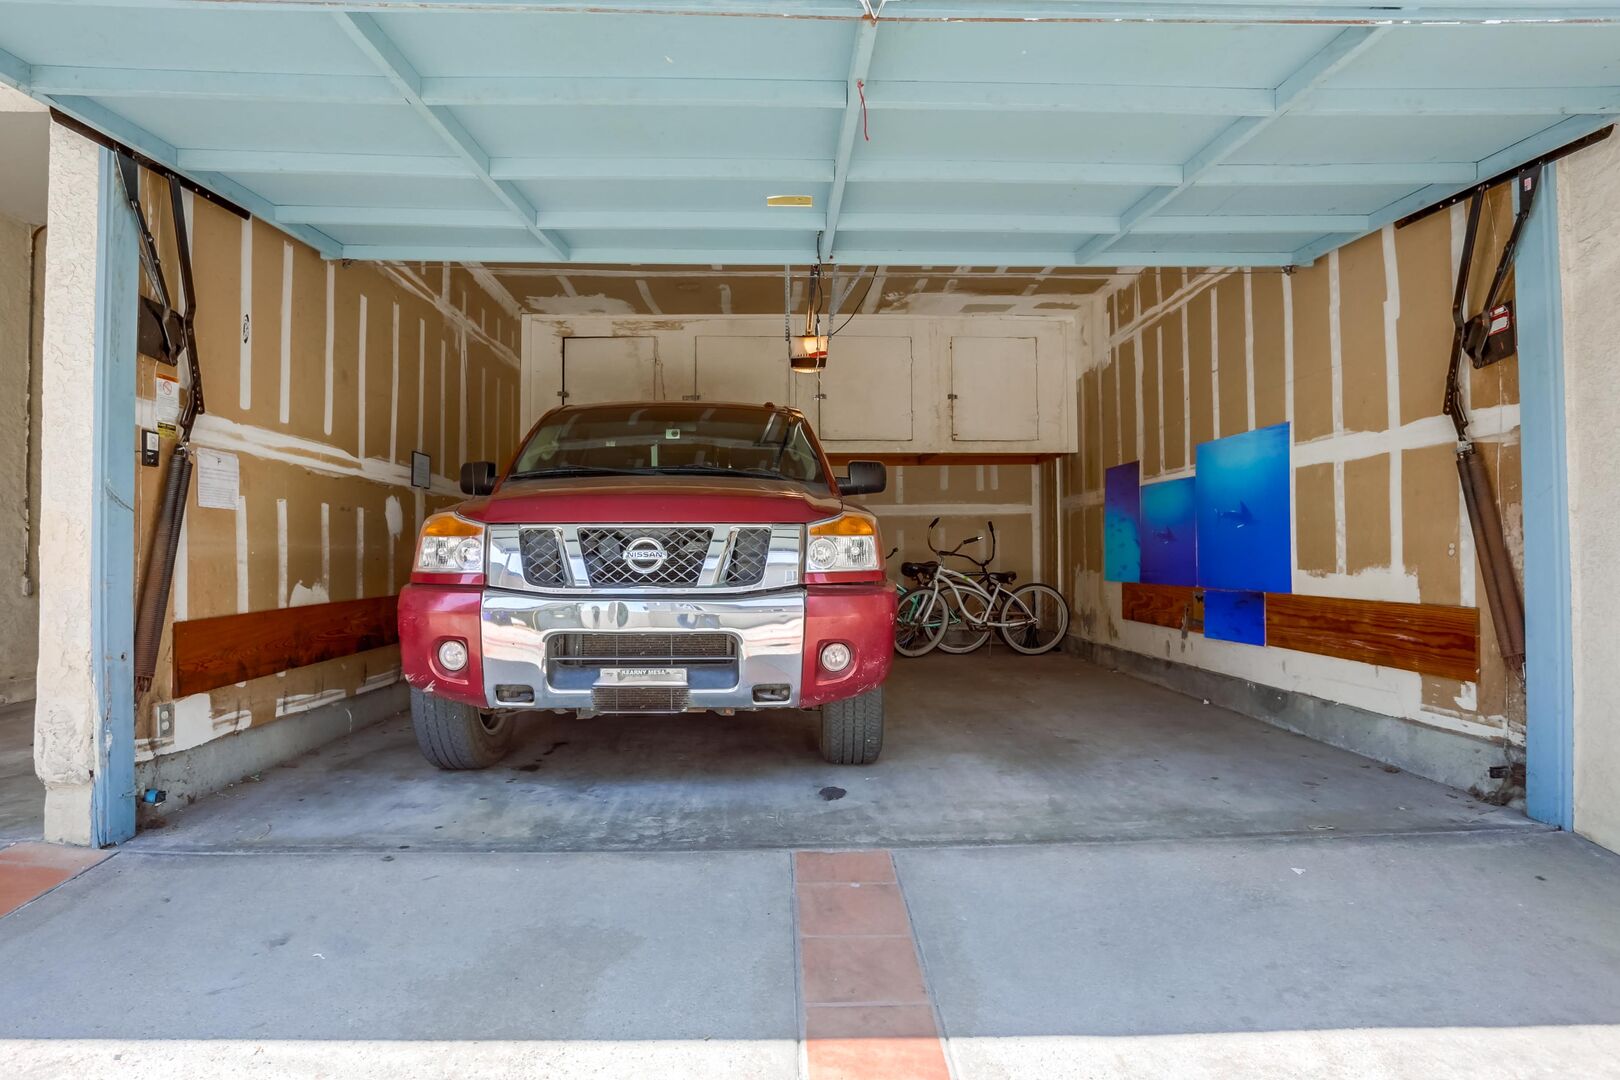 Garage is shared between unit #1 and unit #3